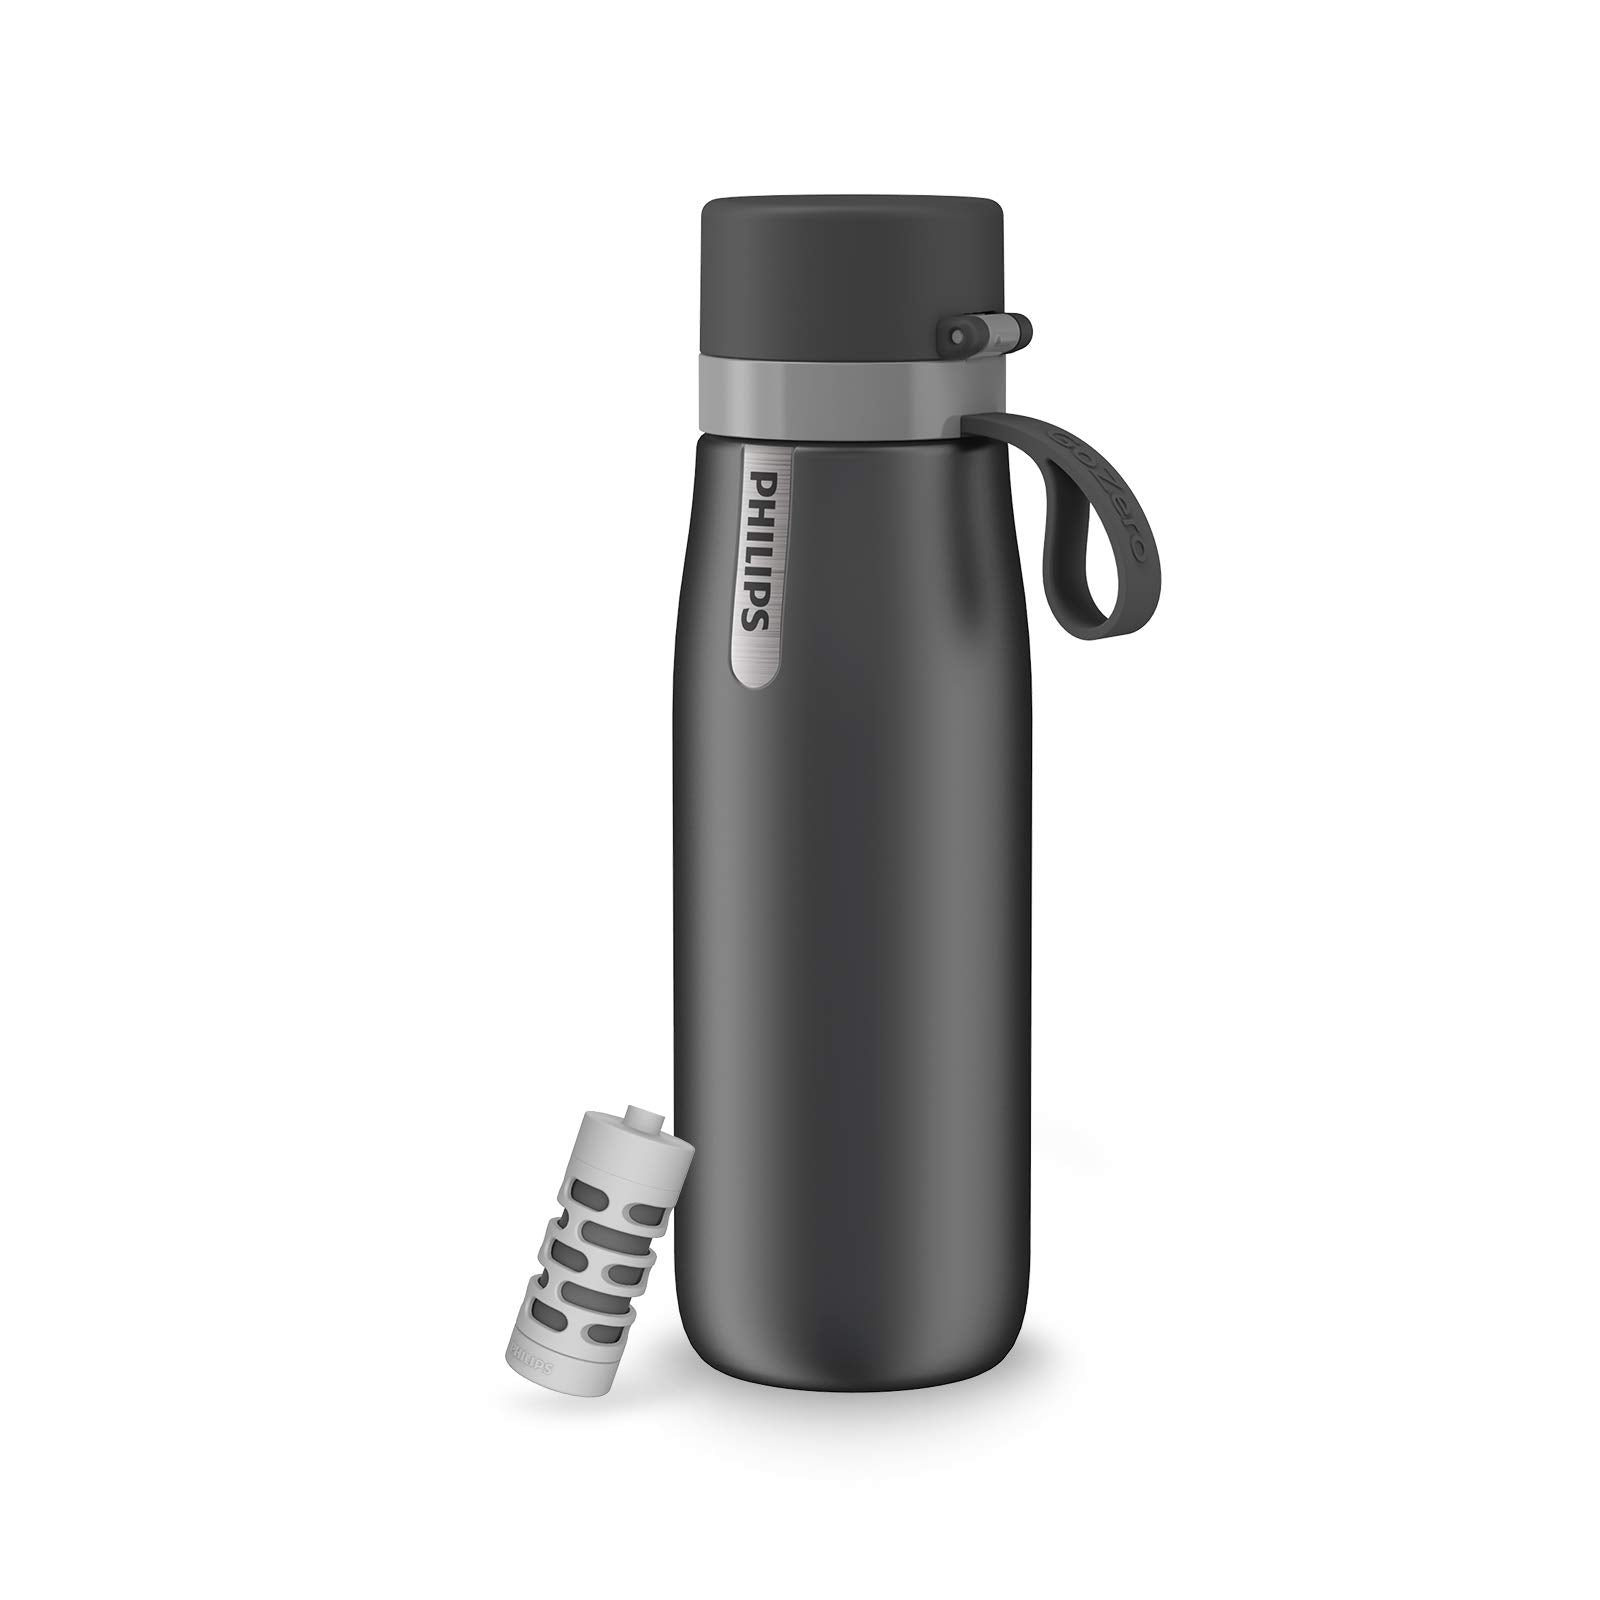 GoZero Insulated Stainless Steel Filter Water Bottle - Stay Hydrated with Clean and Fresh Water On the Go!